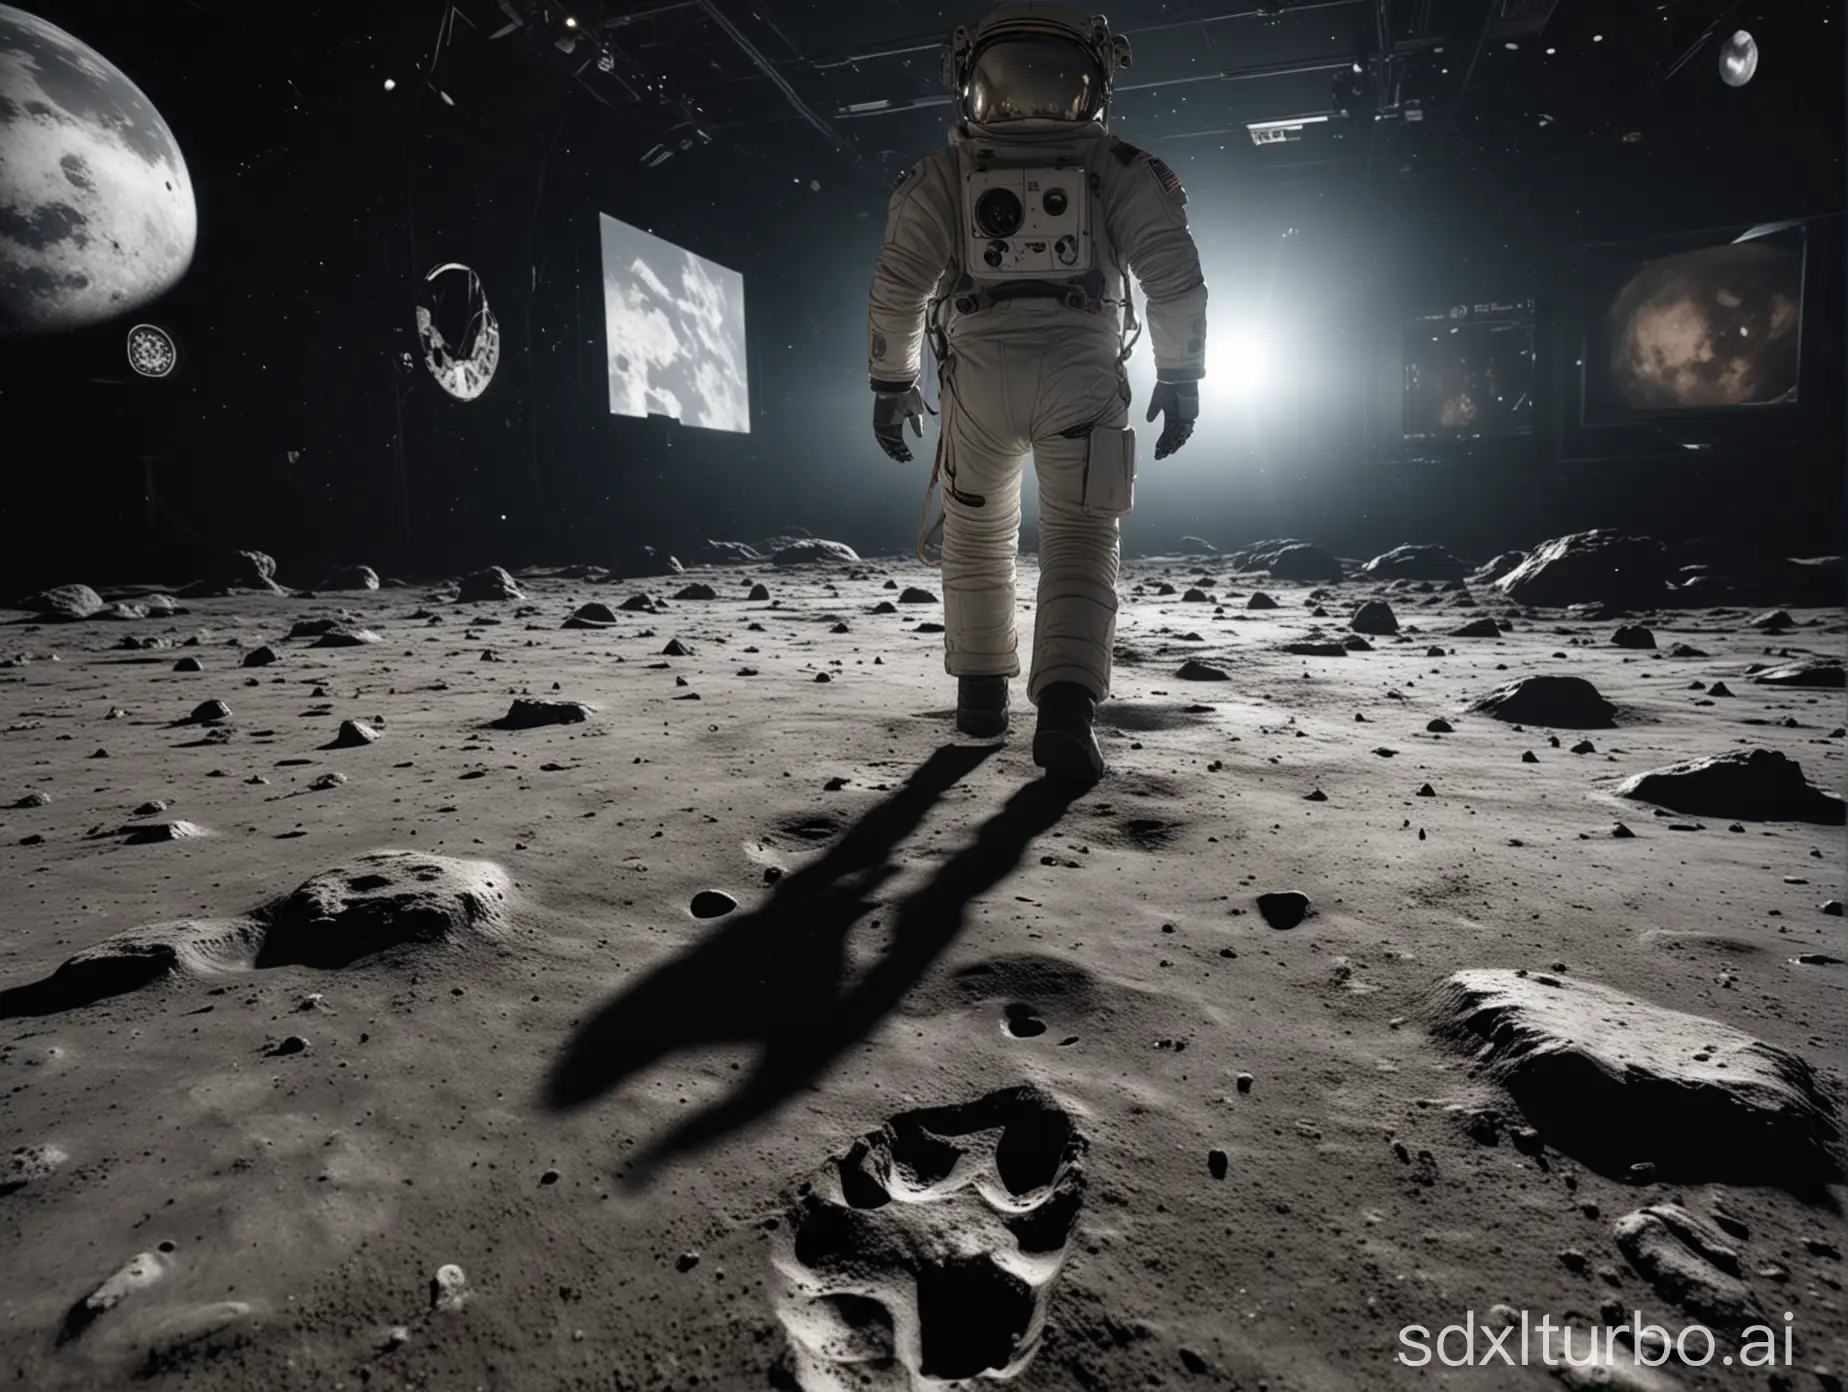 First person view from a VR headset of an astronaut walking on the lunar surface, leaving footprints and the vastness of space surrounding, inside a space exploration museum exhibit hall visible behind, cinematic lighting, extremely detailed